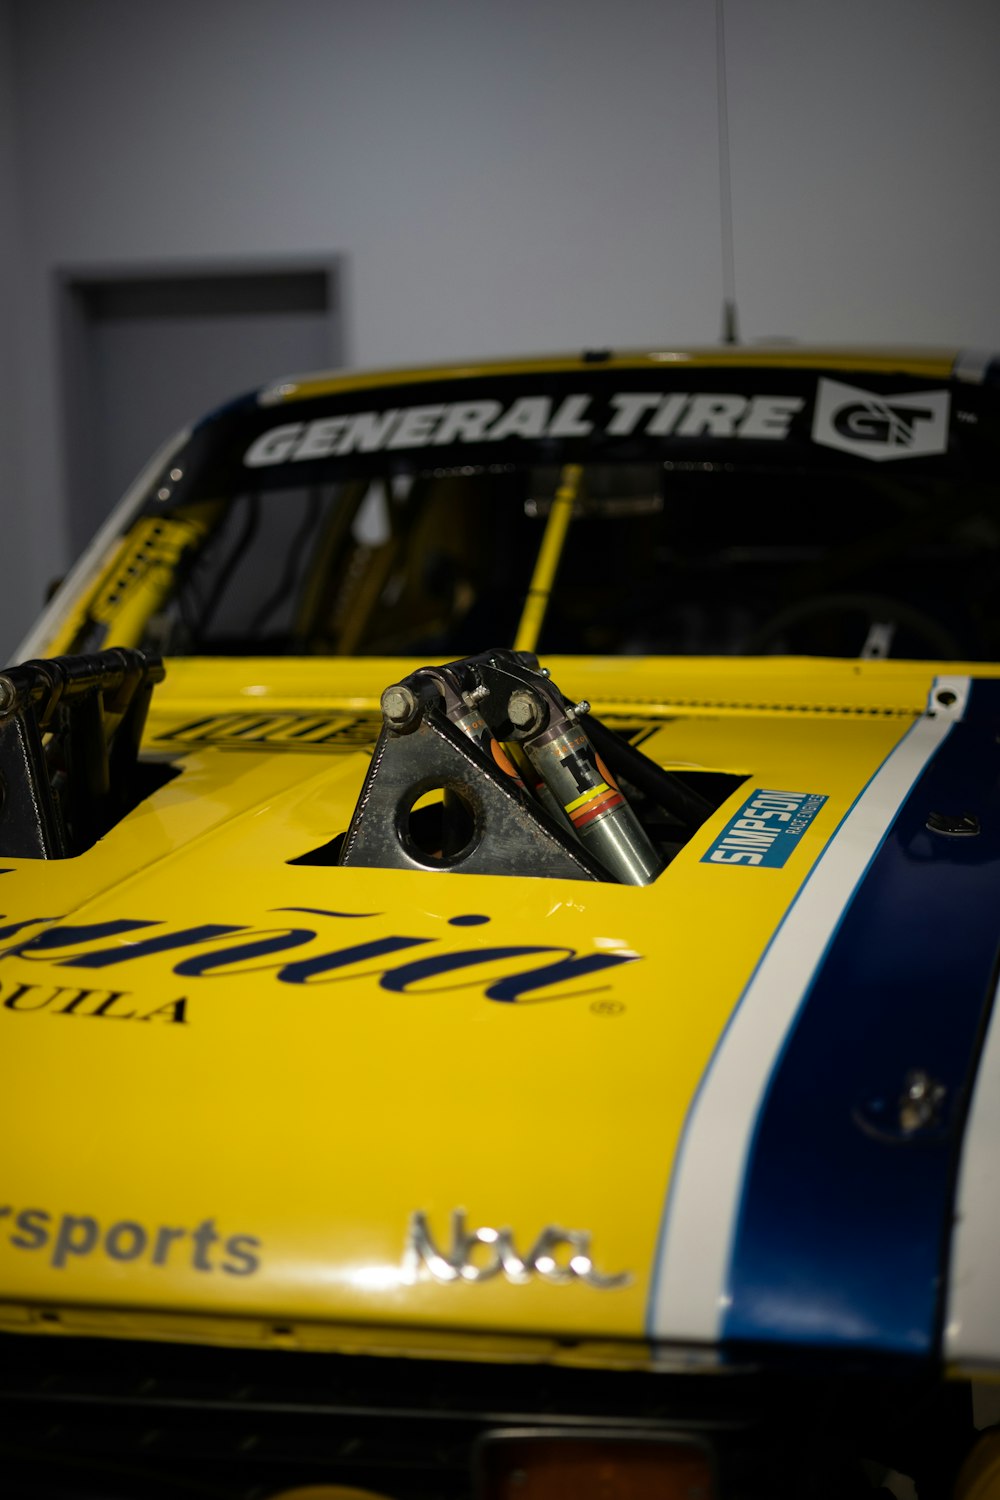 a close up of a yellow race car with blue and white stripes